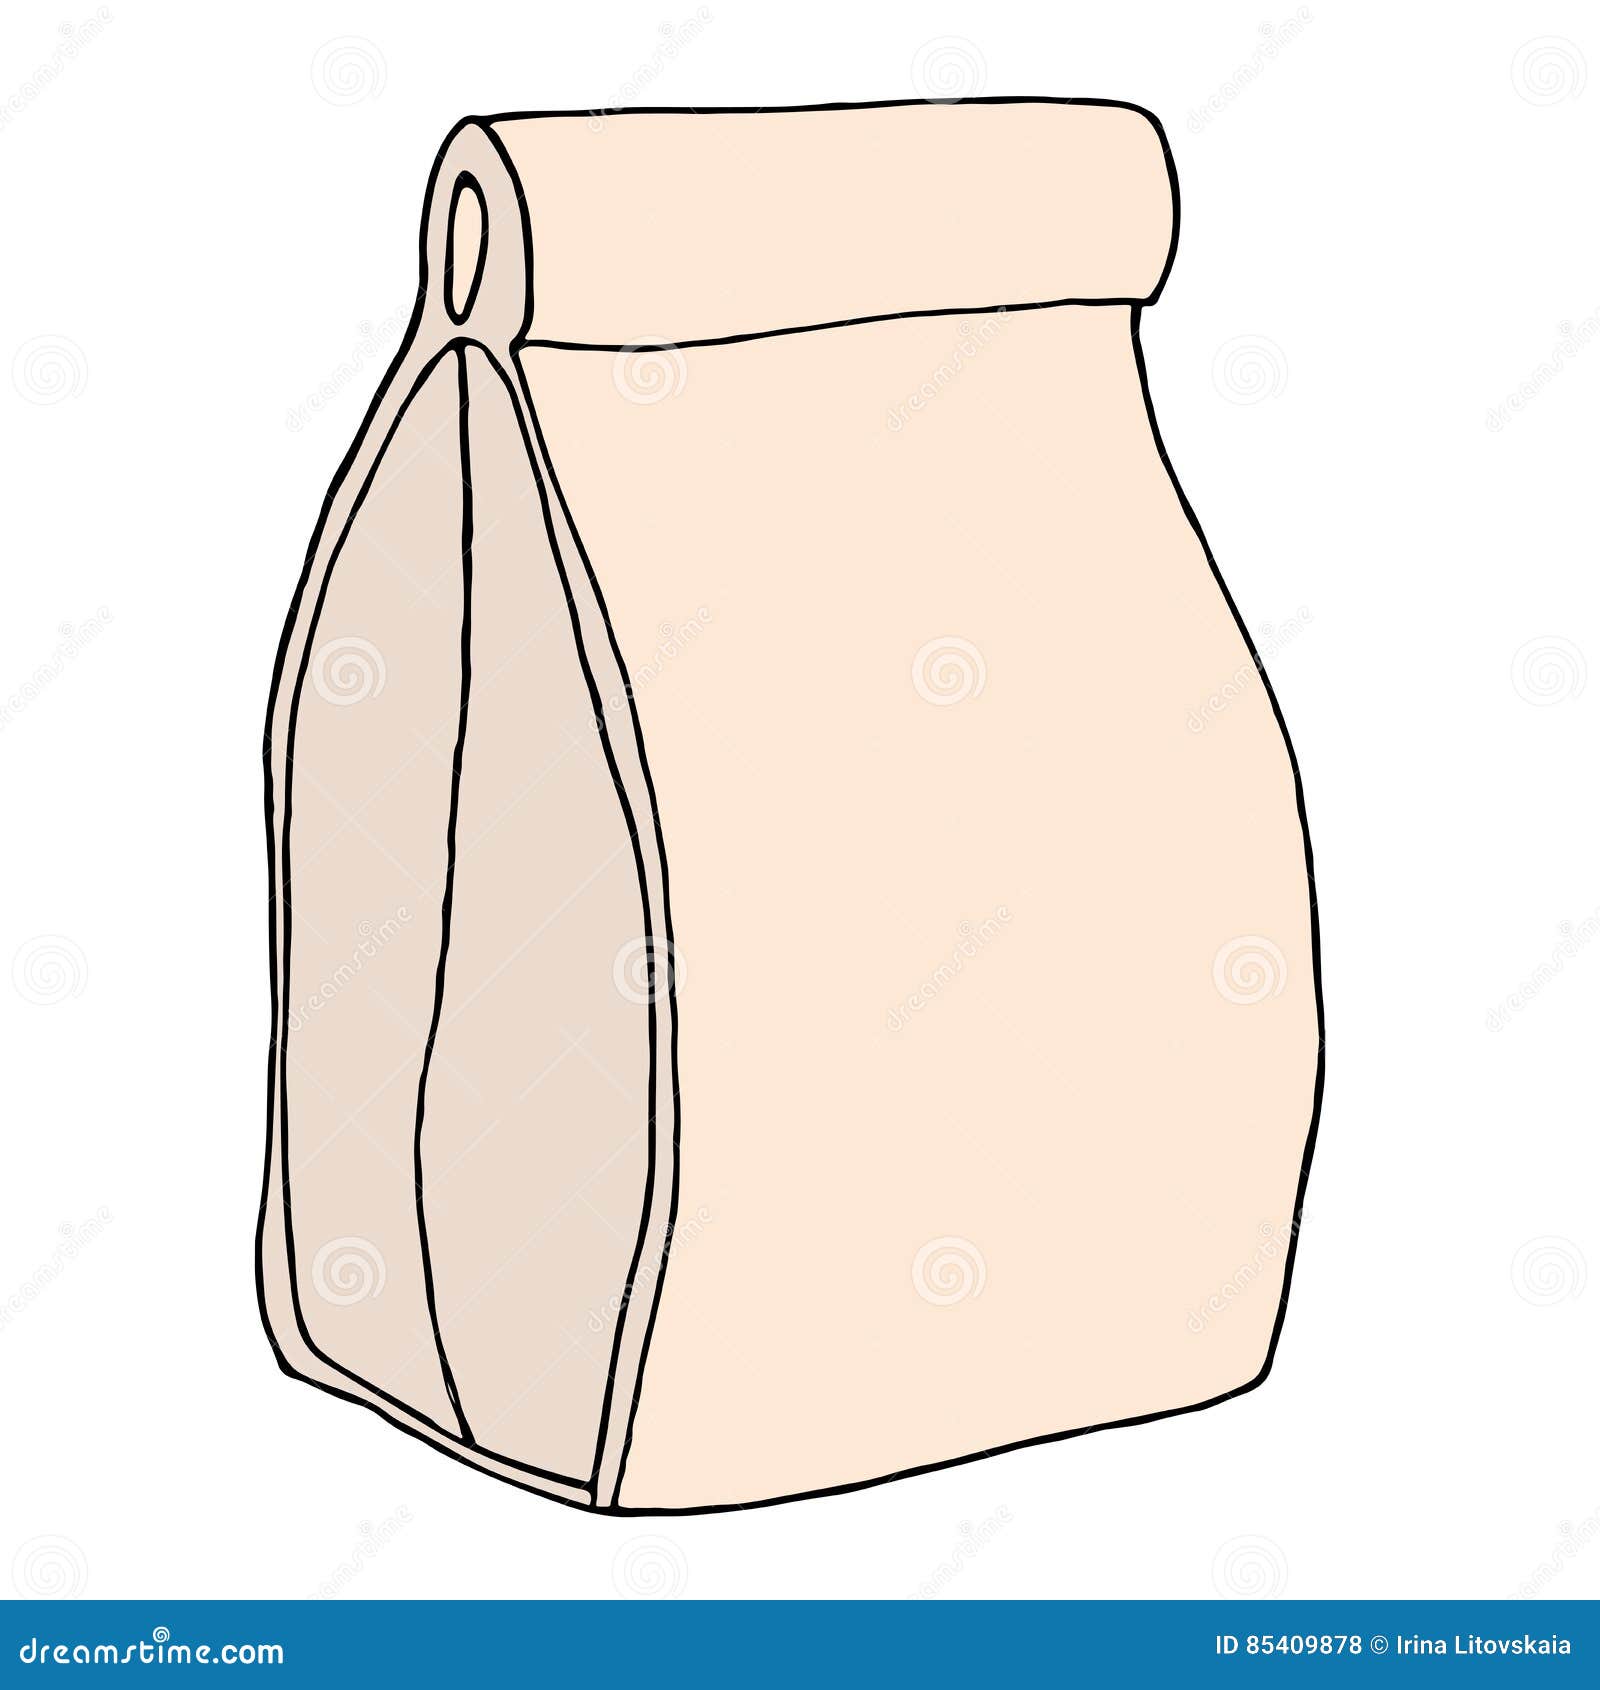 Lunch Bag. Hand Drawn Sketchy Craft Paper Food Bag Stock Vector ...